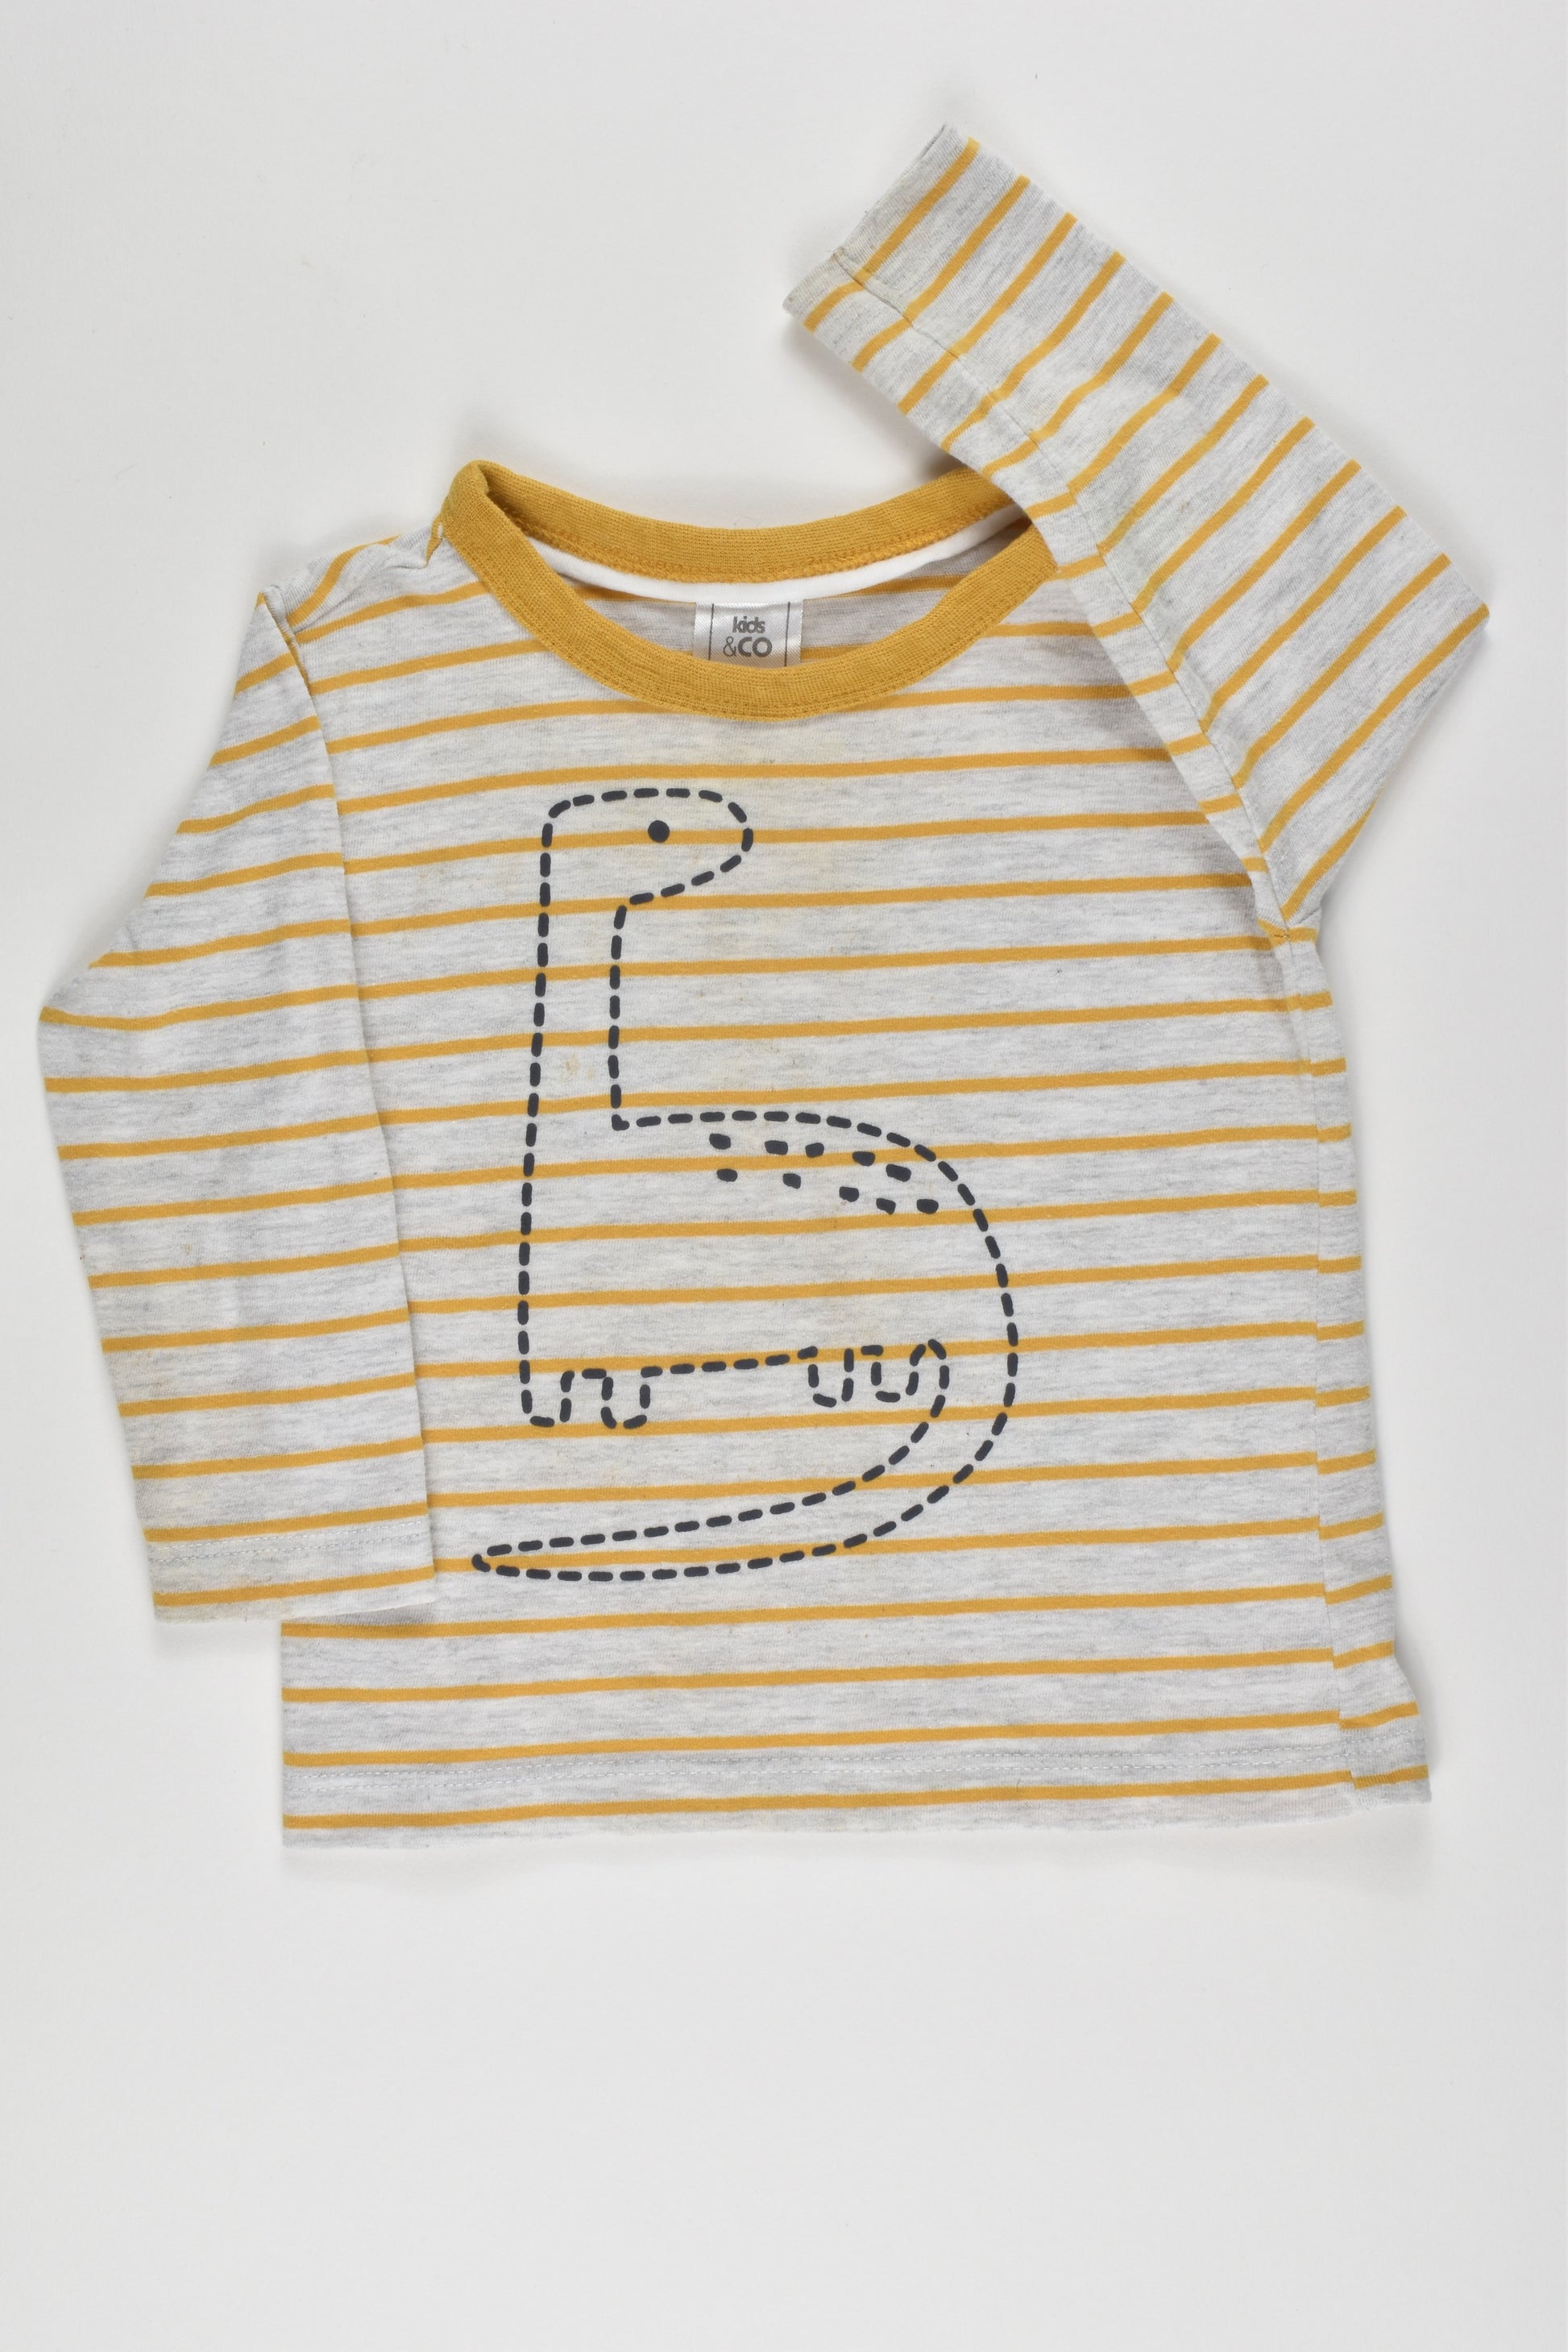 Kids & Co Size 0 Top